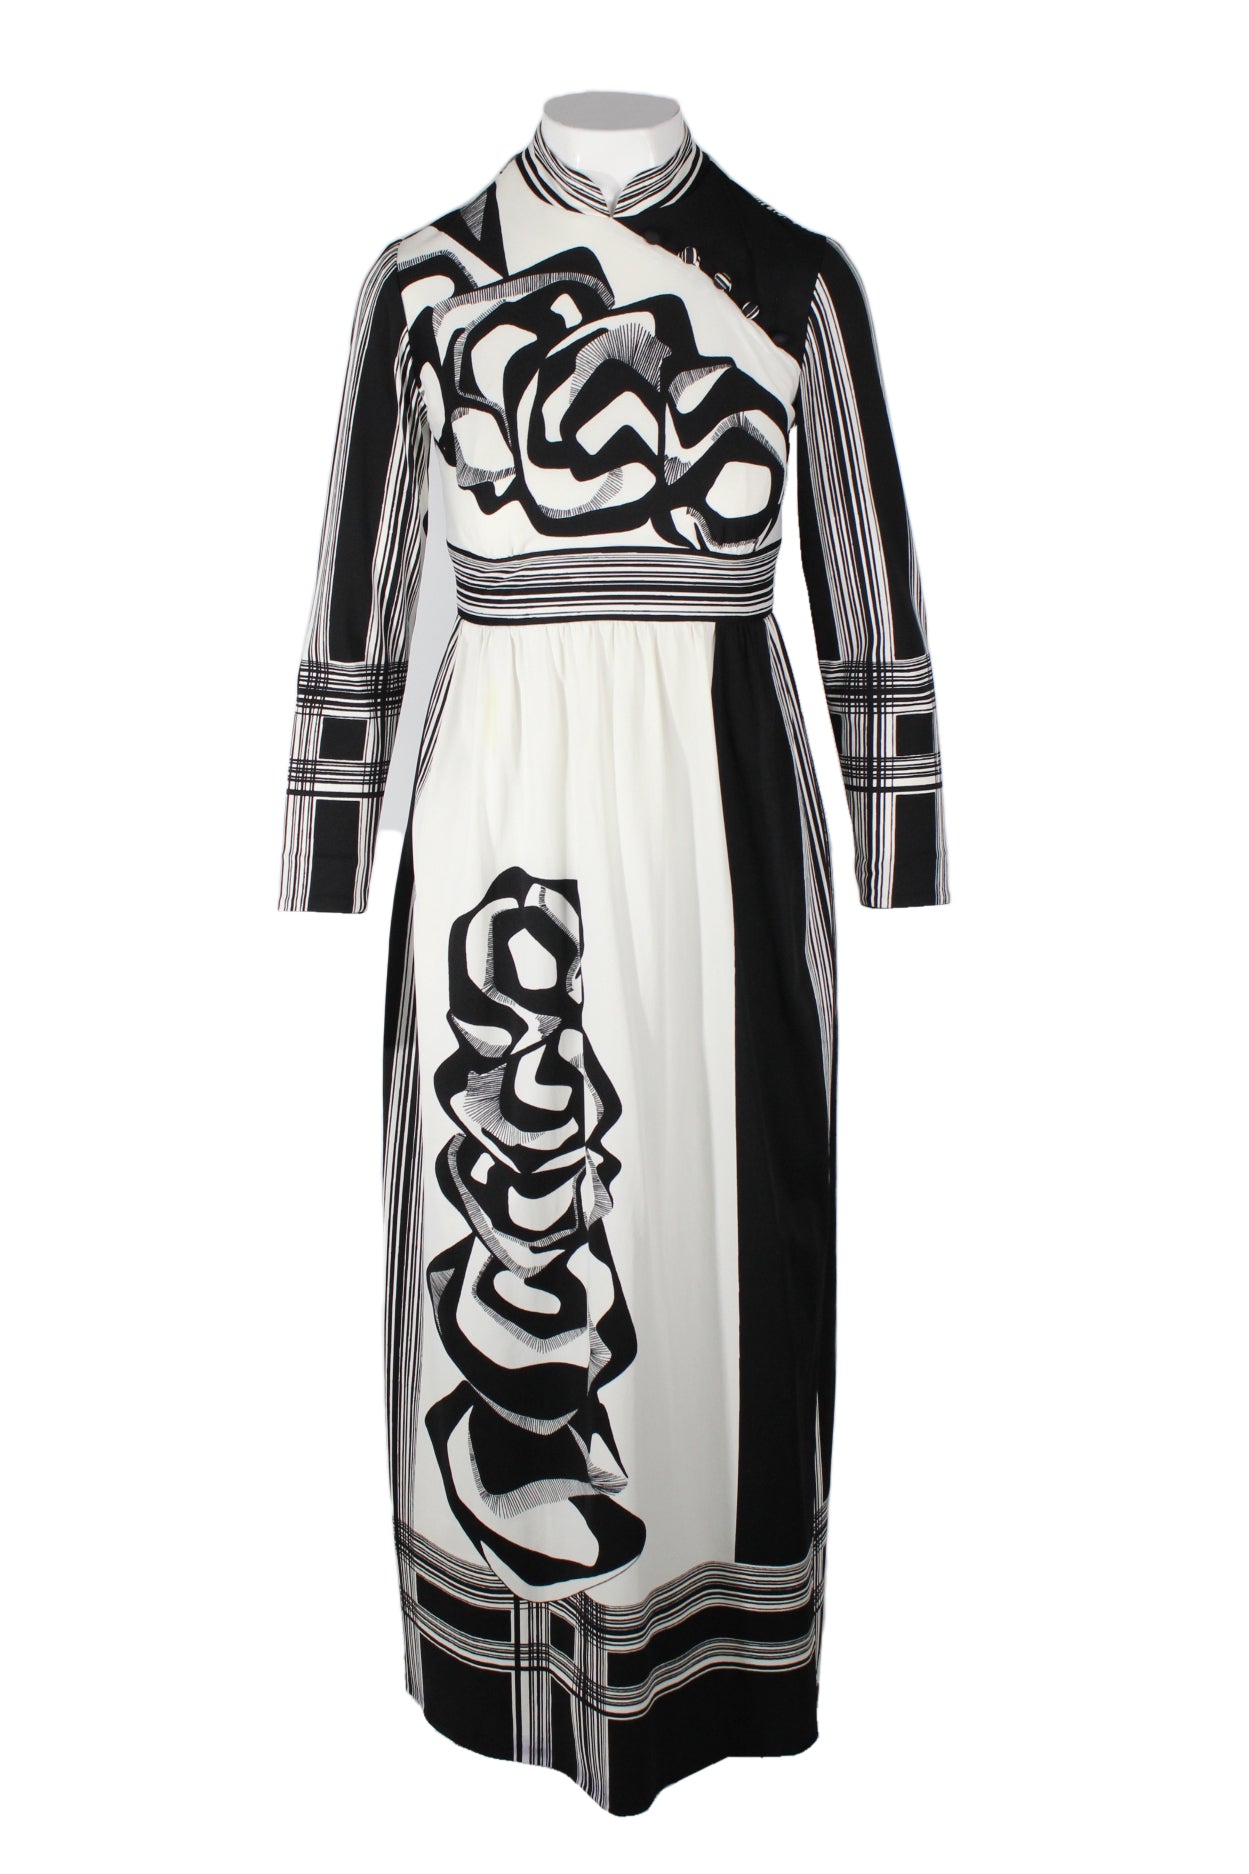 vintage 1970's black and white cheongsam. features geometric graphics framing curvelinear abstract designs. slit opening at knee length, internal lace trim detail, cheongsam beads across chest, and mandarin collar  